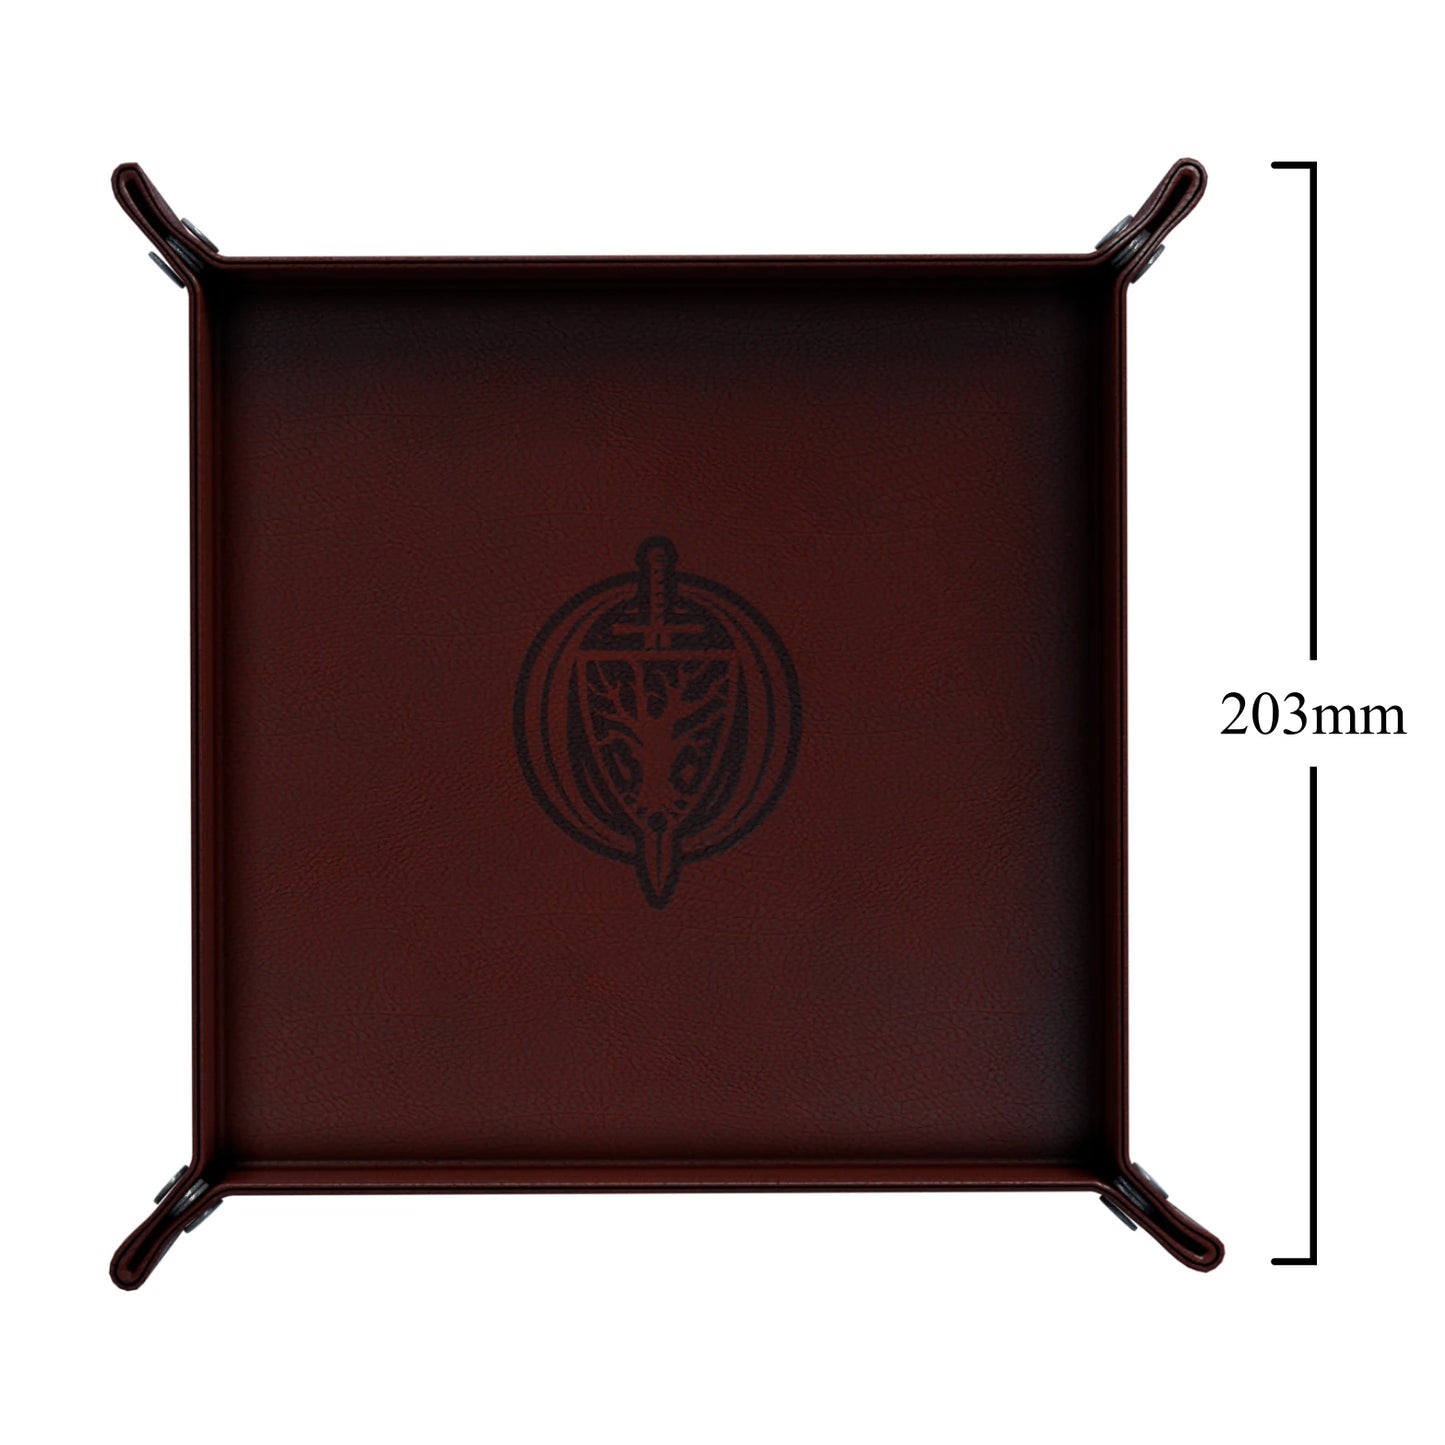 Premium Faux Leather Dice Tray